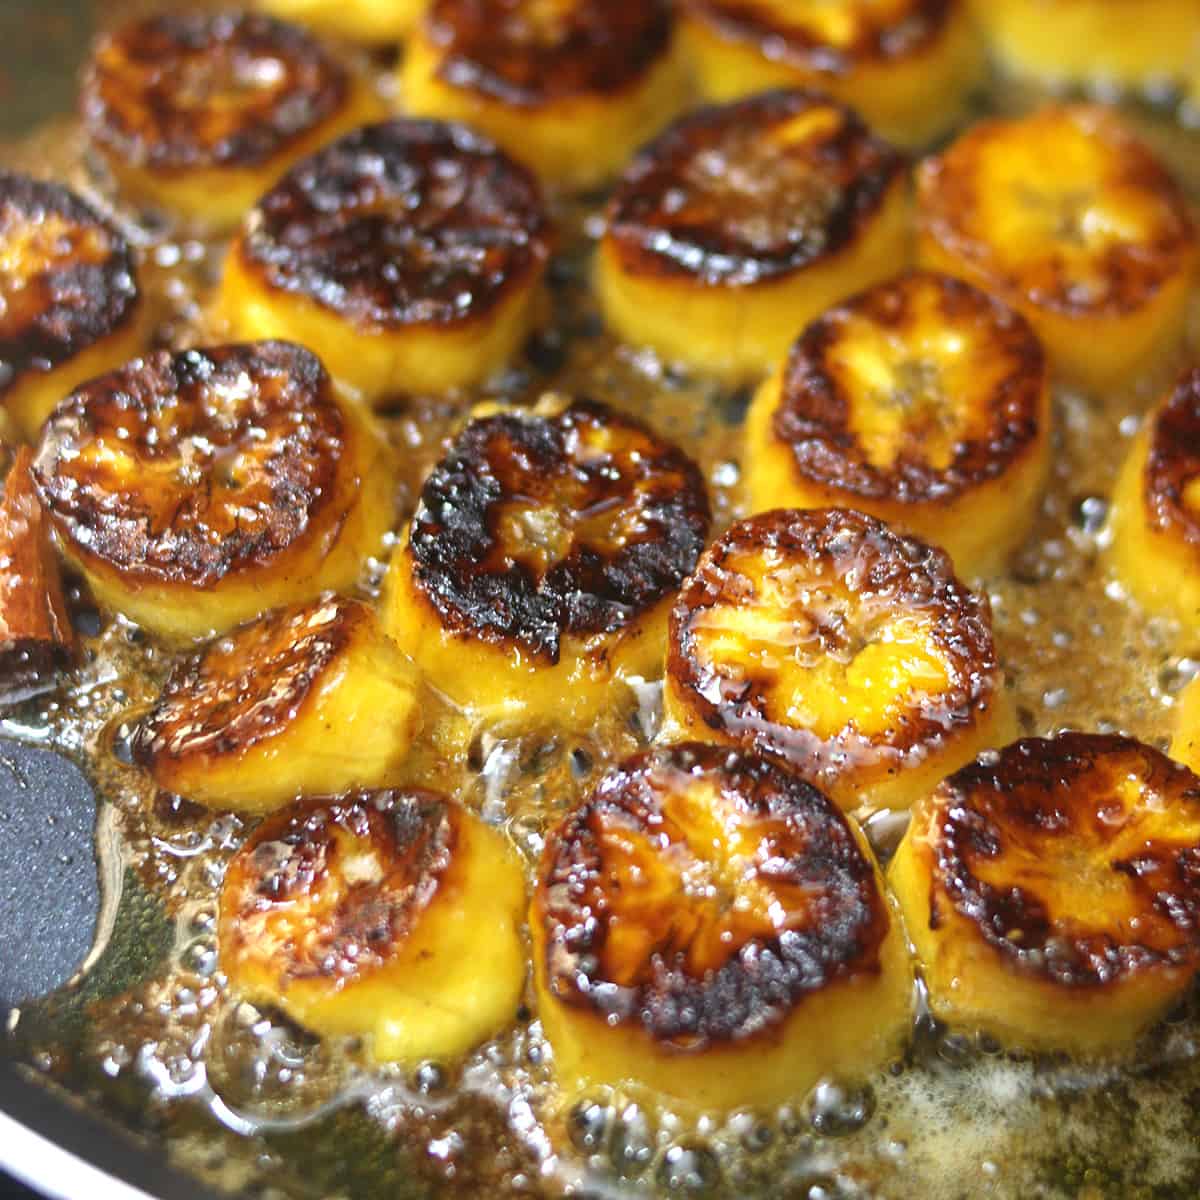 How to caramelize sweet plantains or bananas?